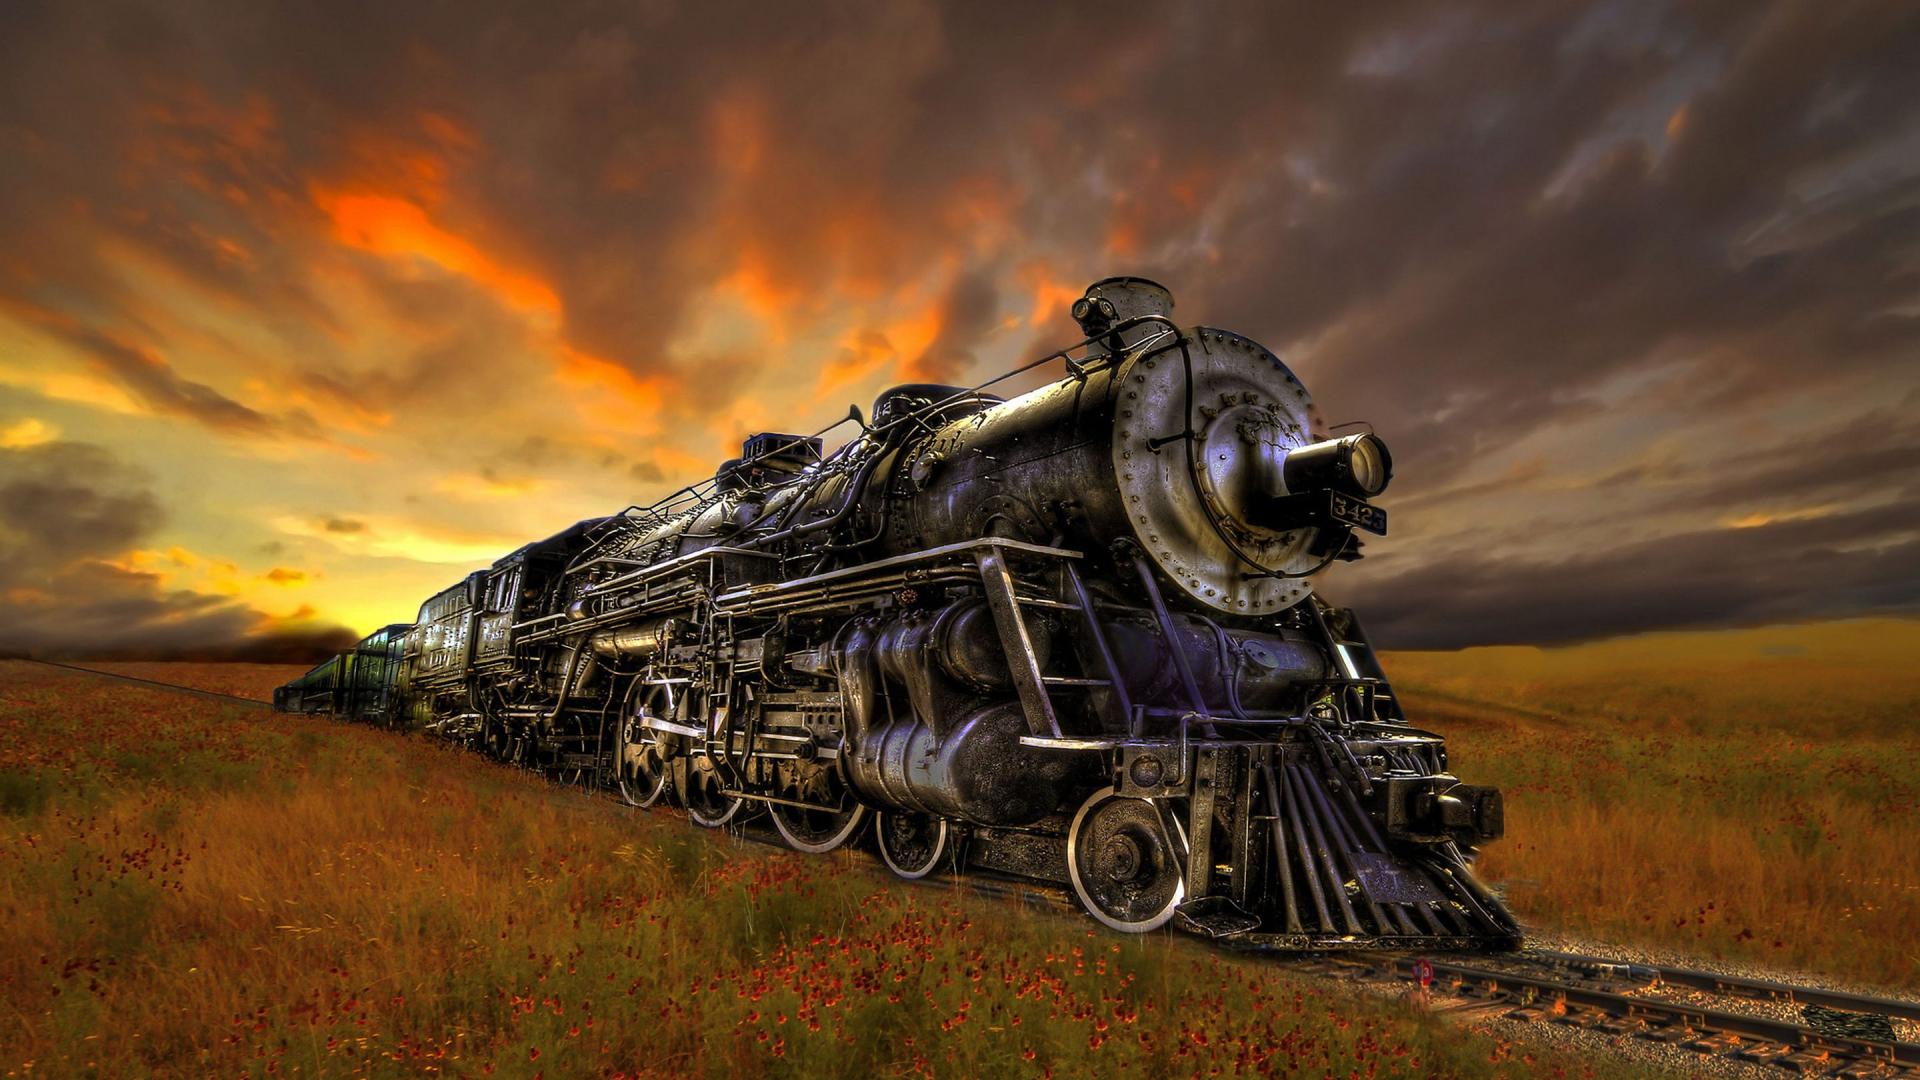 Steam Train Wallpaper HD Pictures In High Definition Or